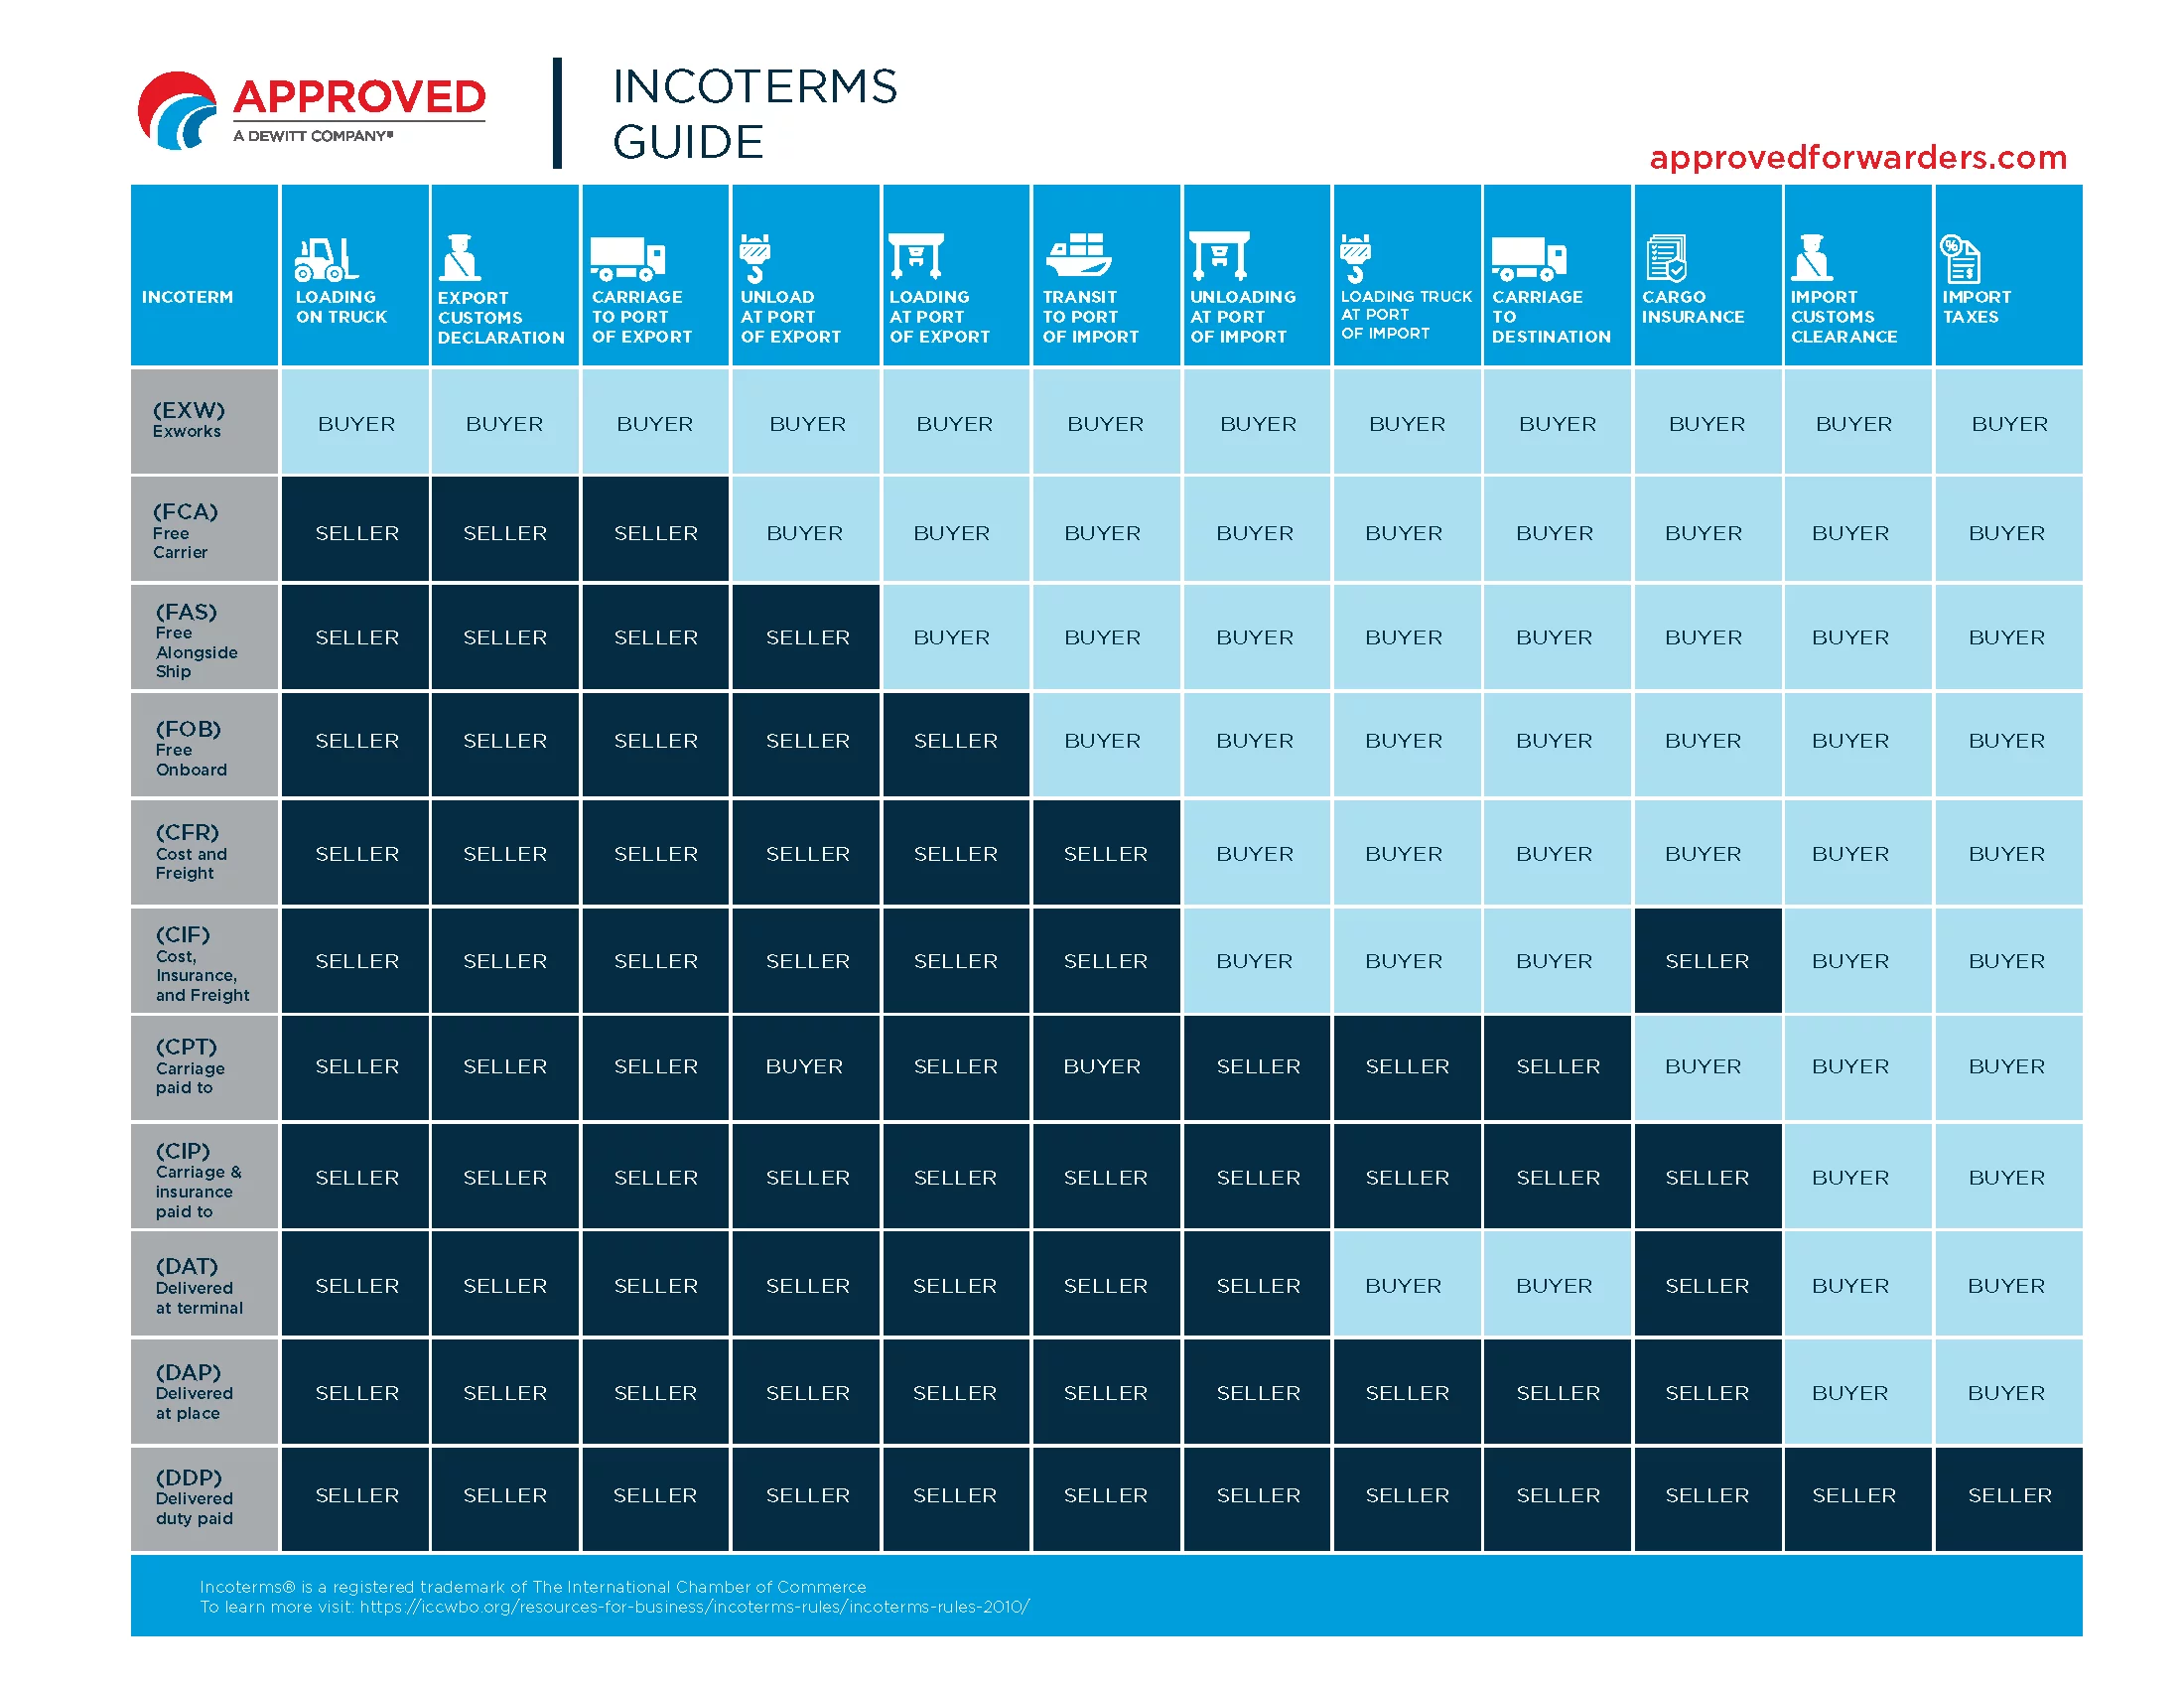 2010 Incoterms Guide